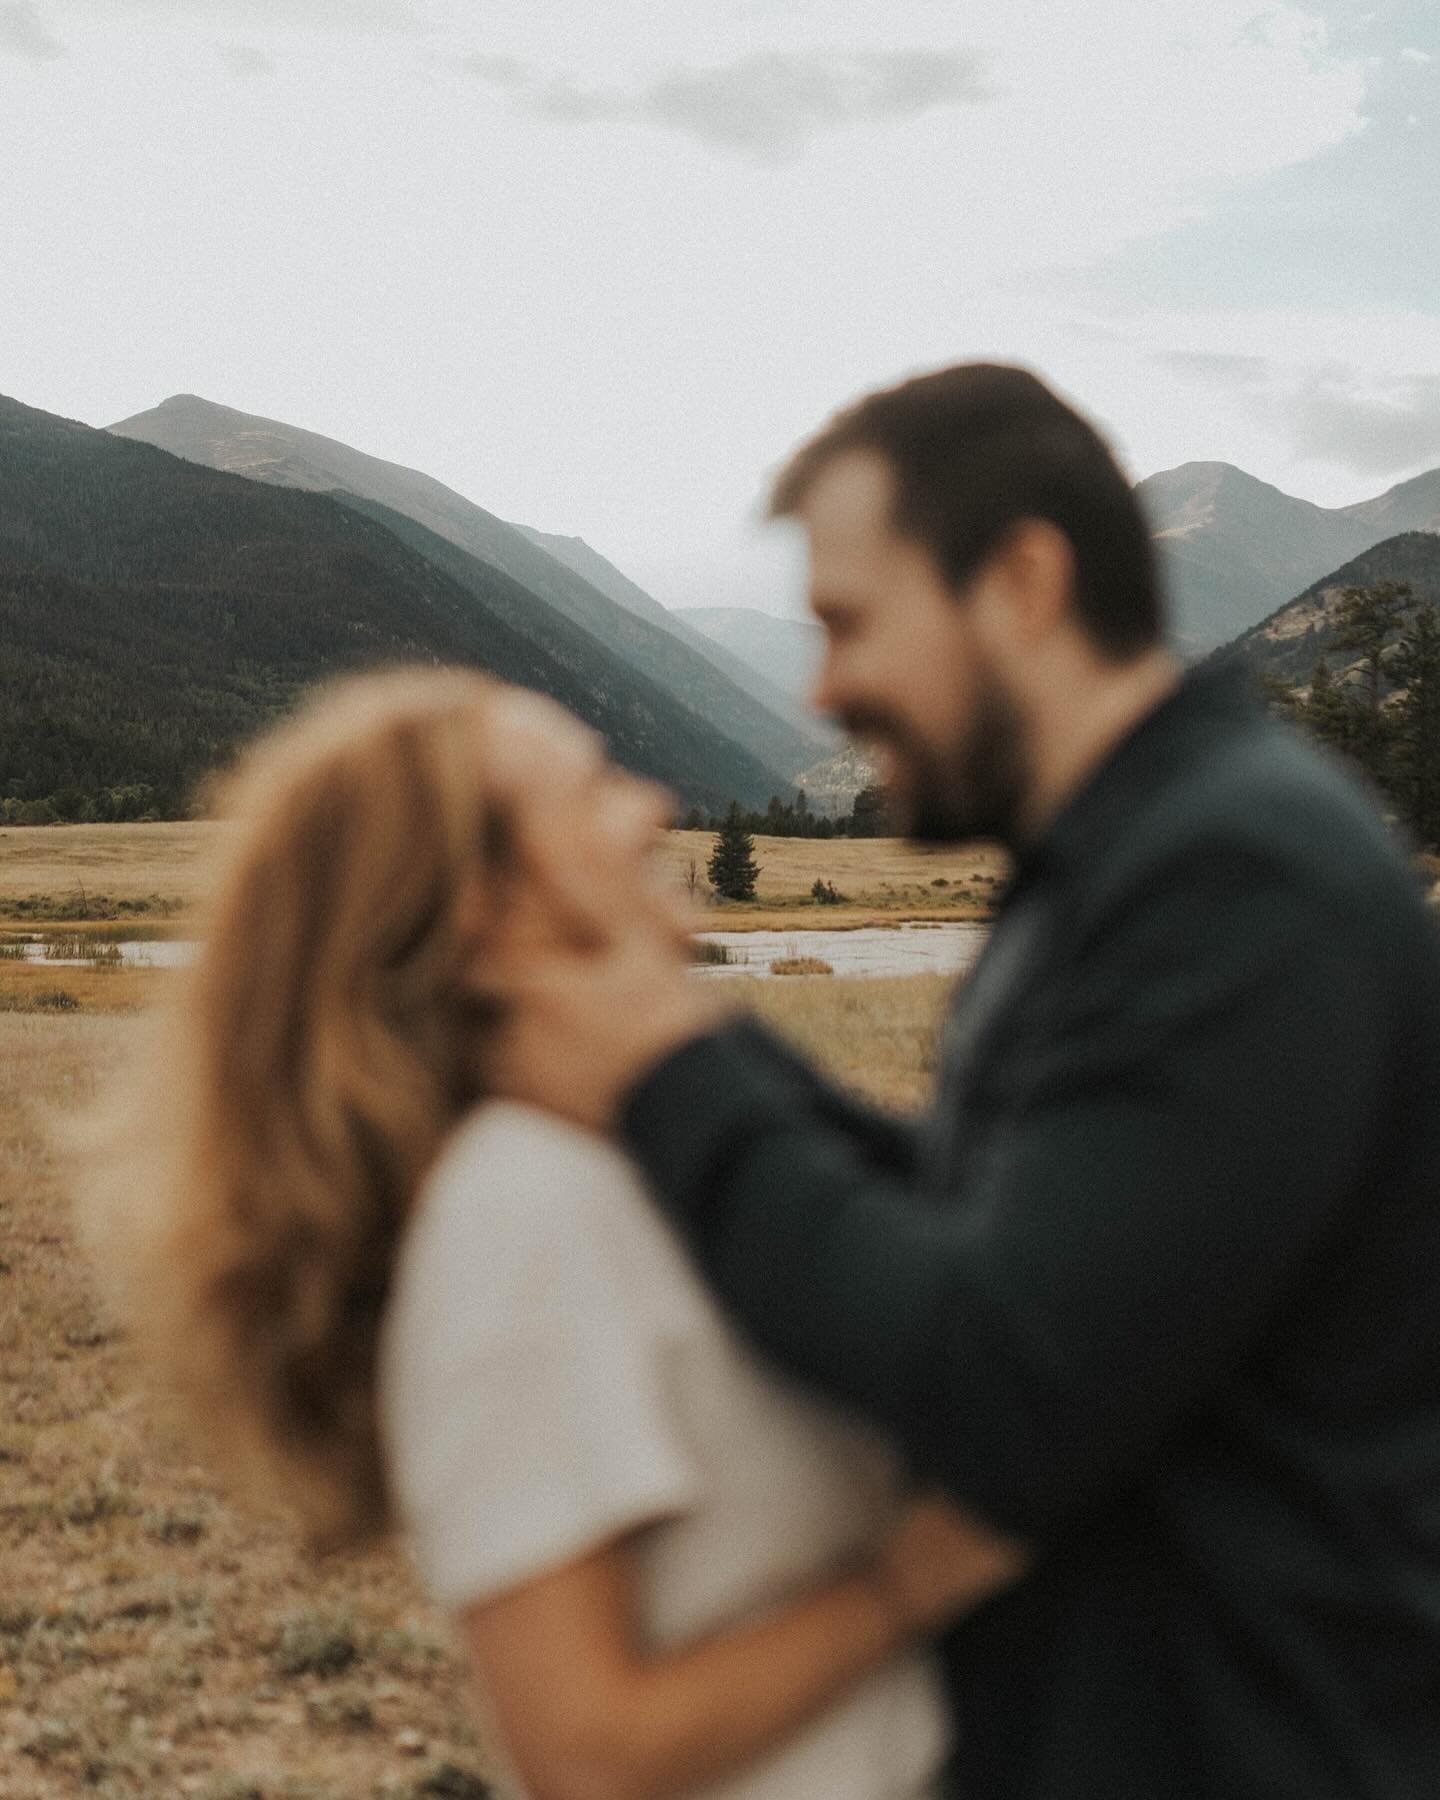 Give me more of these two in RMNP ✨🫶🏼

&mdash;
#greenweddingshoes #tennesseeweddingphotographer #travelweddingphotographer #weddingphotographer #elopemenetphotographer  #theknot #winterengagementphotos#tennesseephotographer #engagementphotos 
#nash